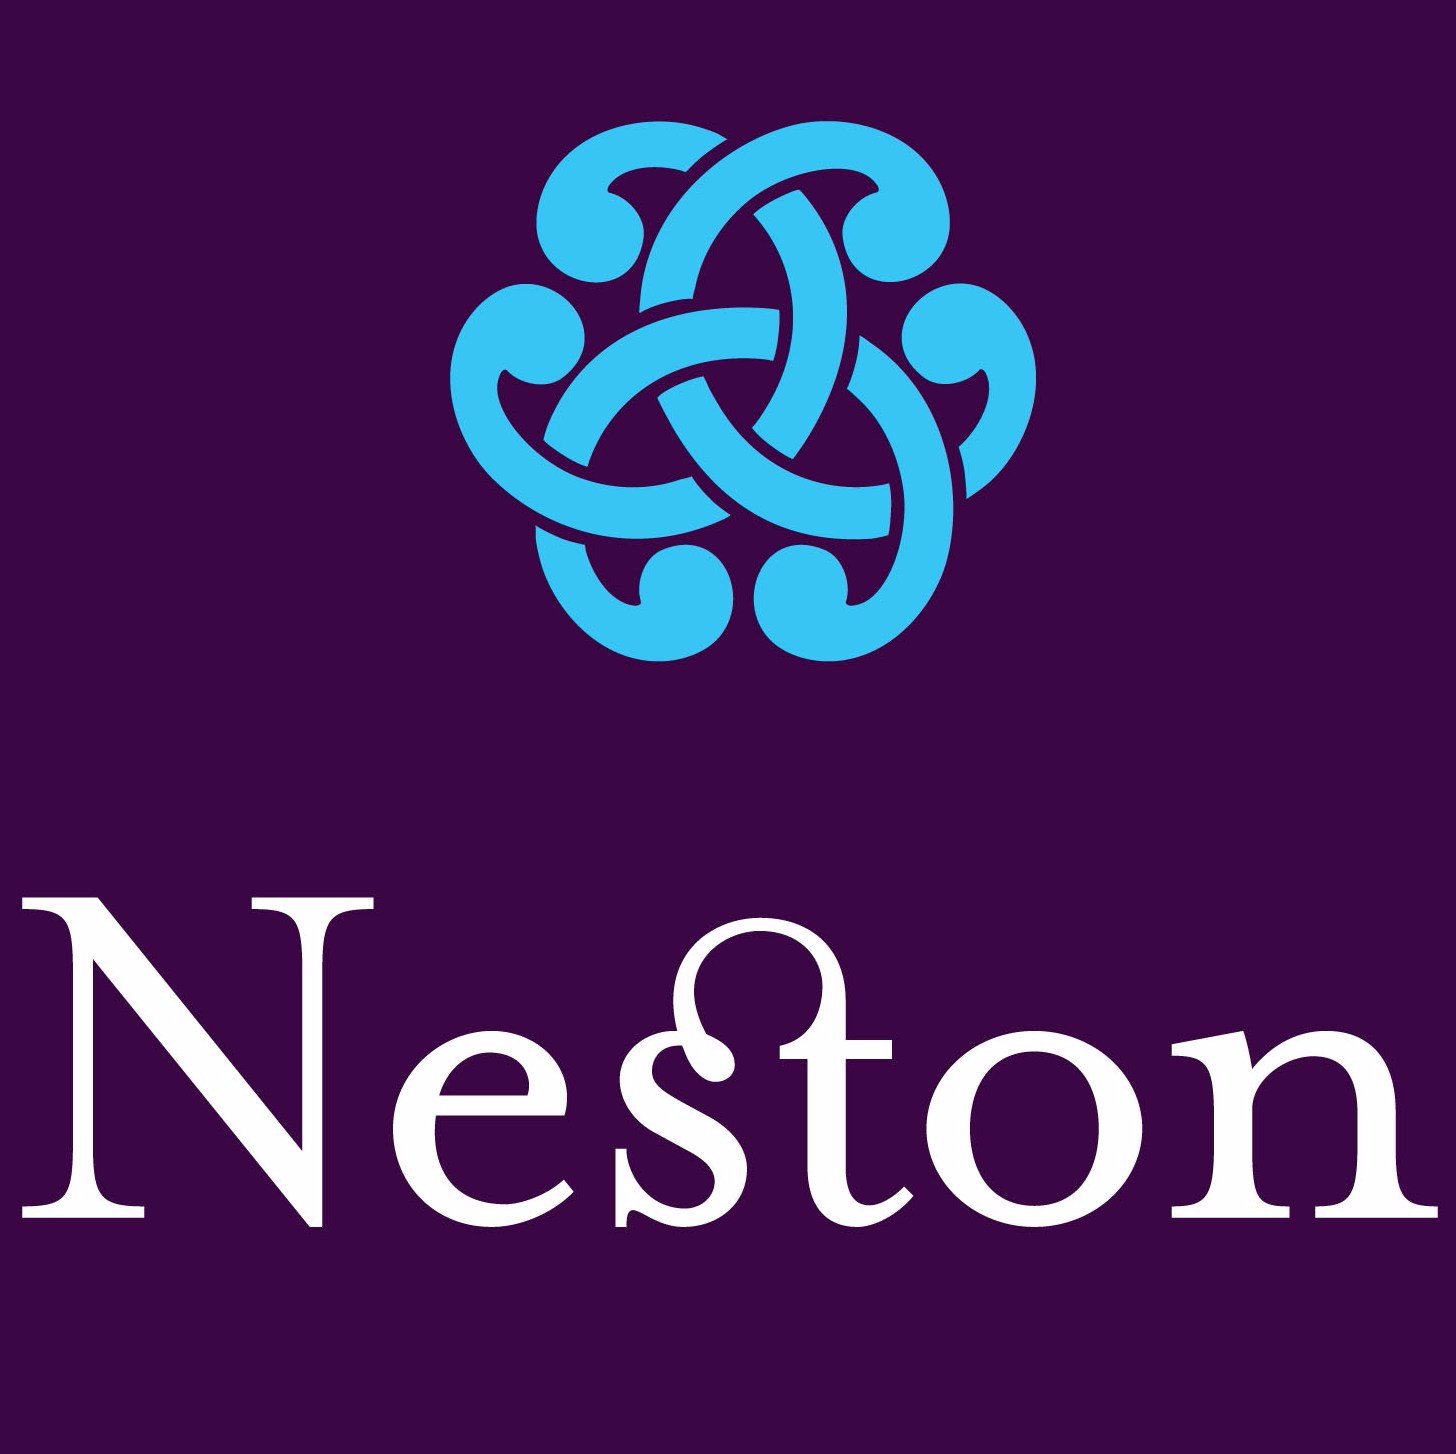 For information about what Neston Town Council does please visit our website https://t.co/7ClOQHV8Uf